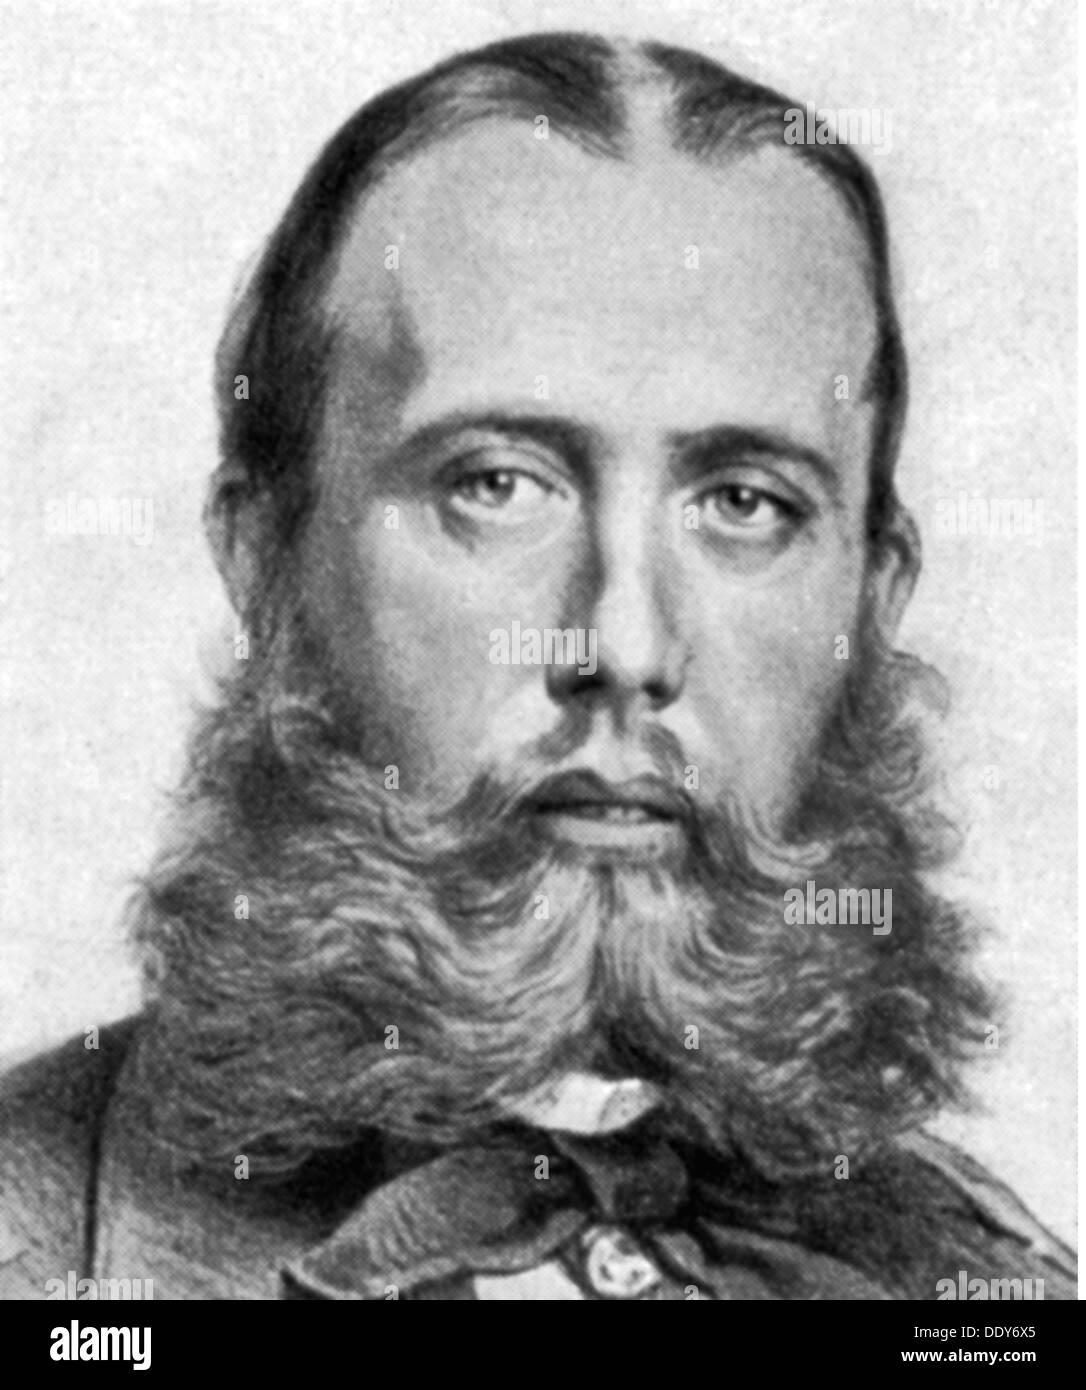 Maximilian I, 6.6.1832 - 19.6.1867, emperor of Mexico 10.4.1864 - 14.5.1867, portrait, drawing, from: 'Grosser Brockhaus', circa 1900, Stock Photo